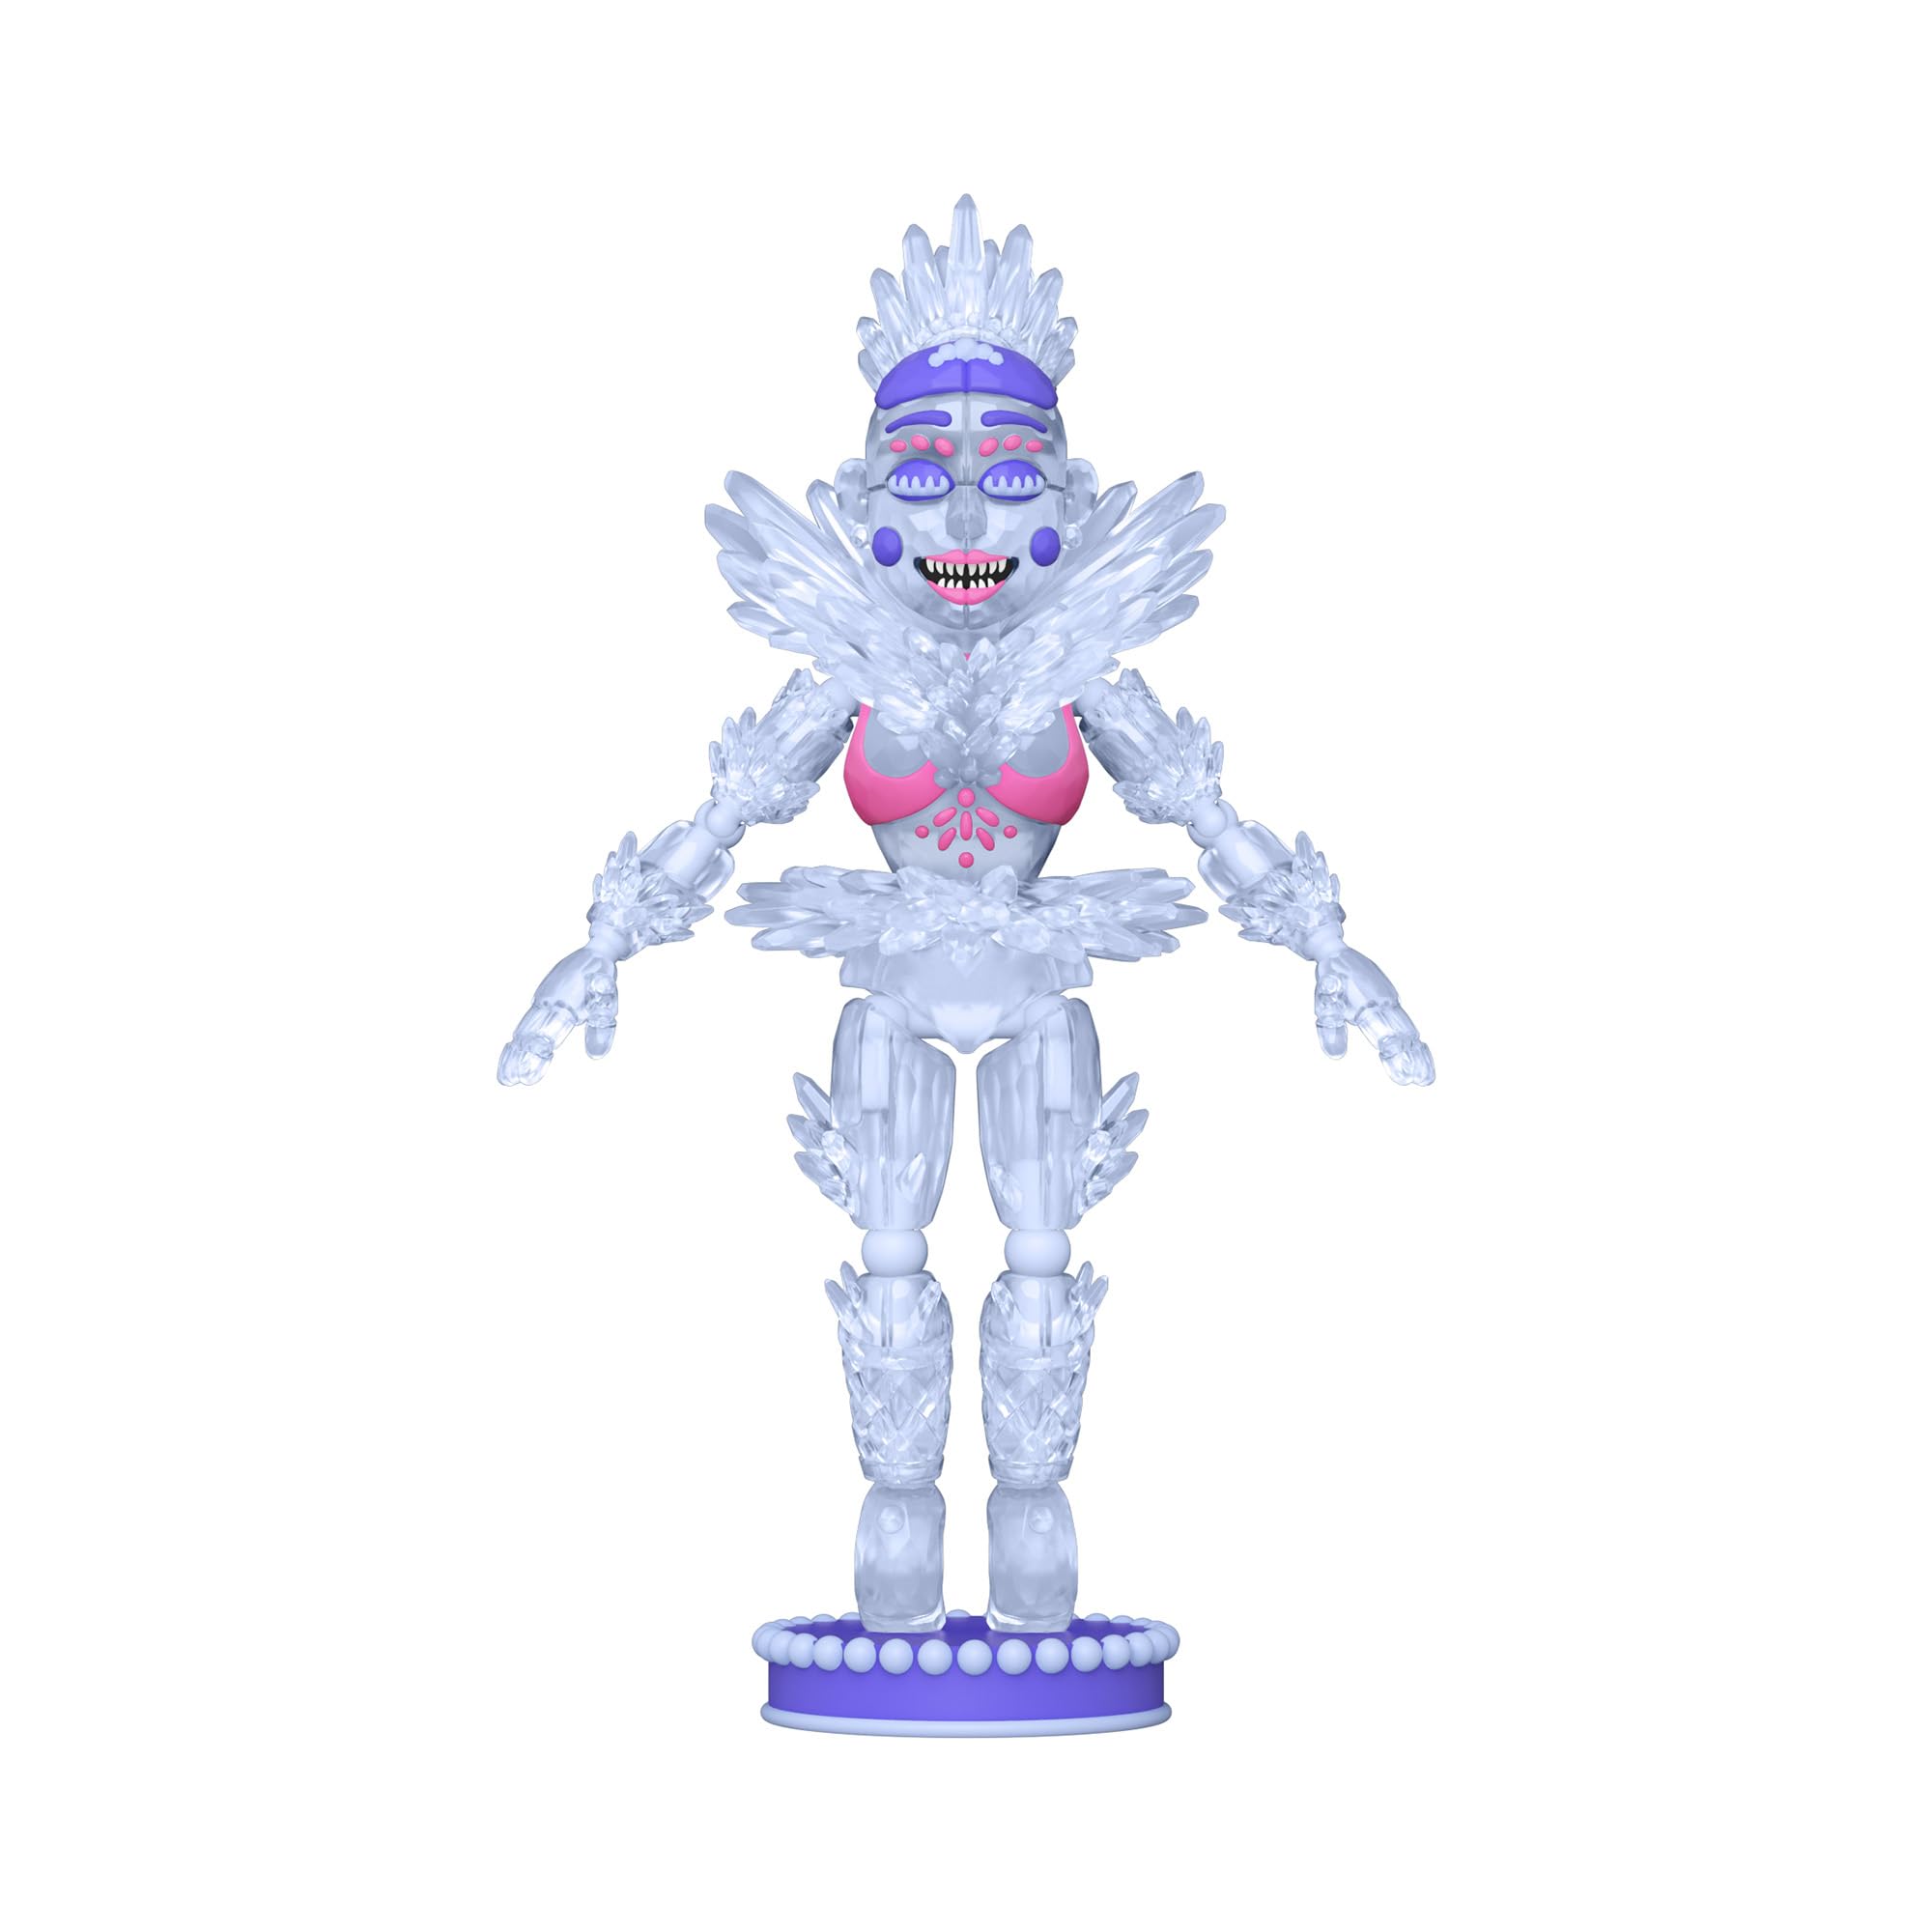 Funko Five Nights at Freddy's Arctic Ballora Collectible Action Figure - Limited Edition Exclusive